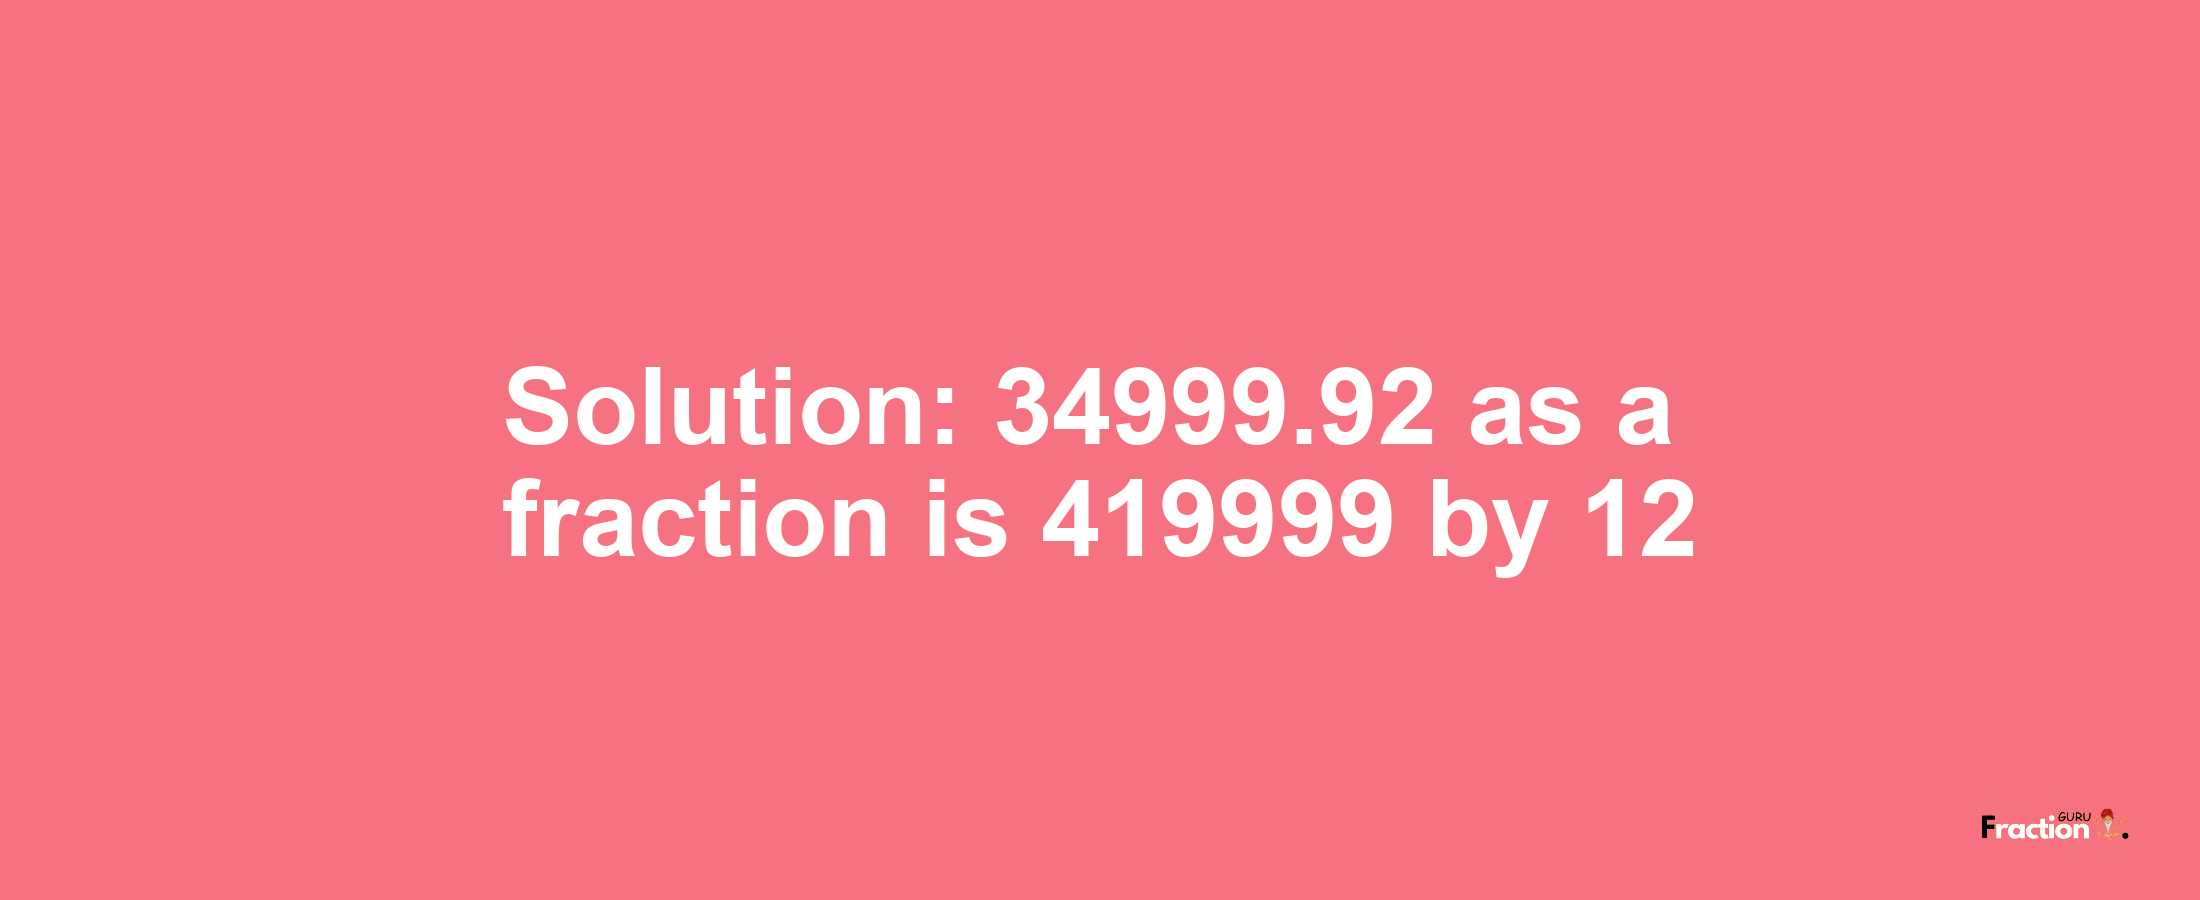 Solution:34999.92 as a fraction is 419999/12